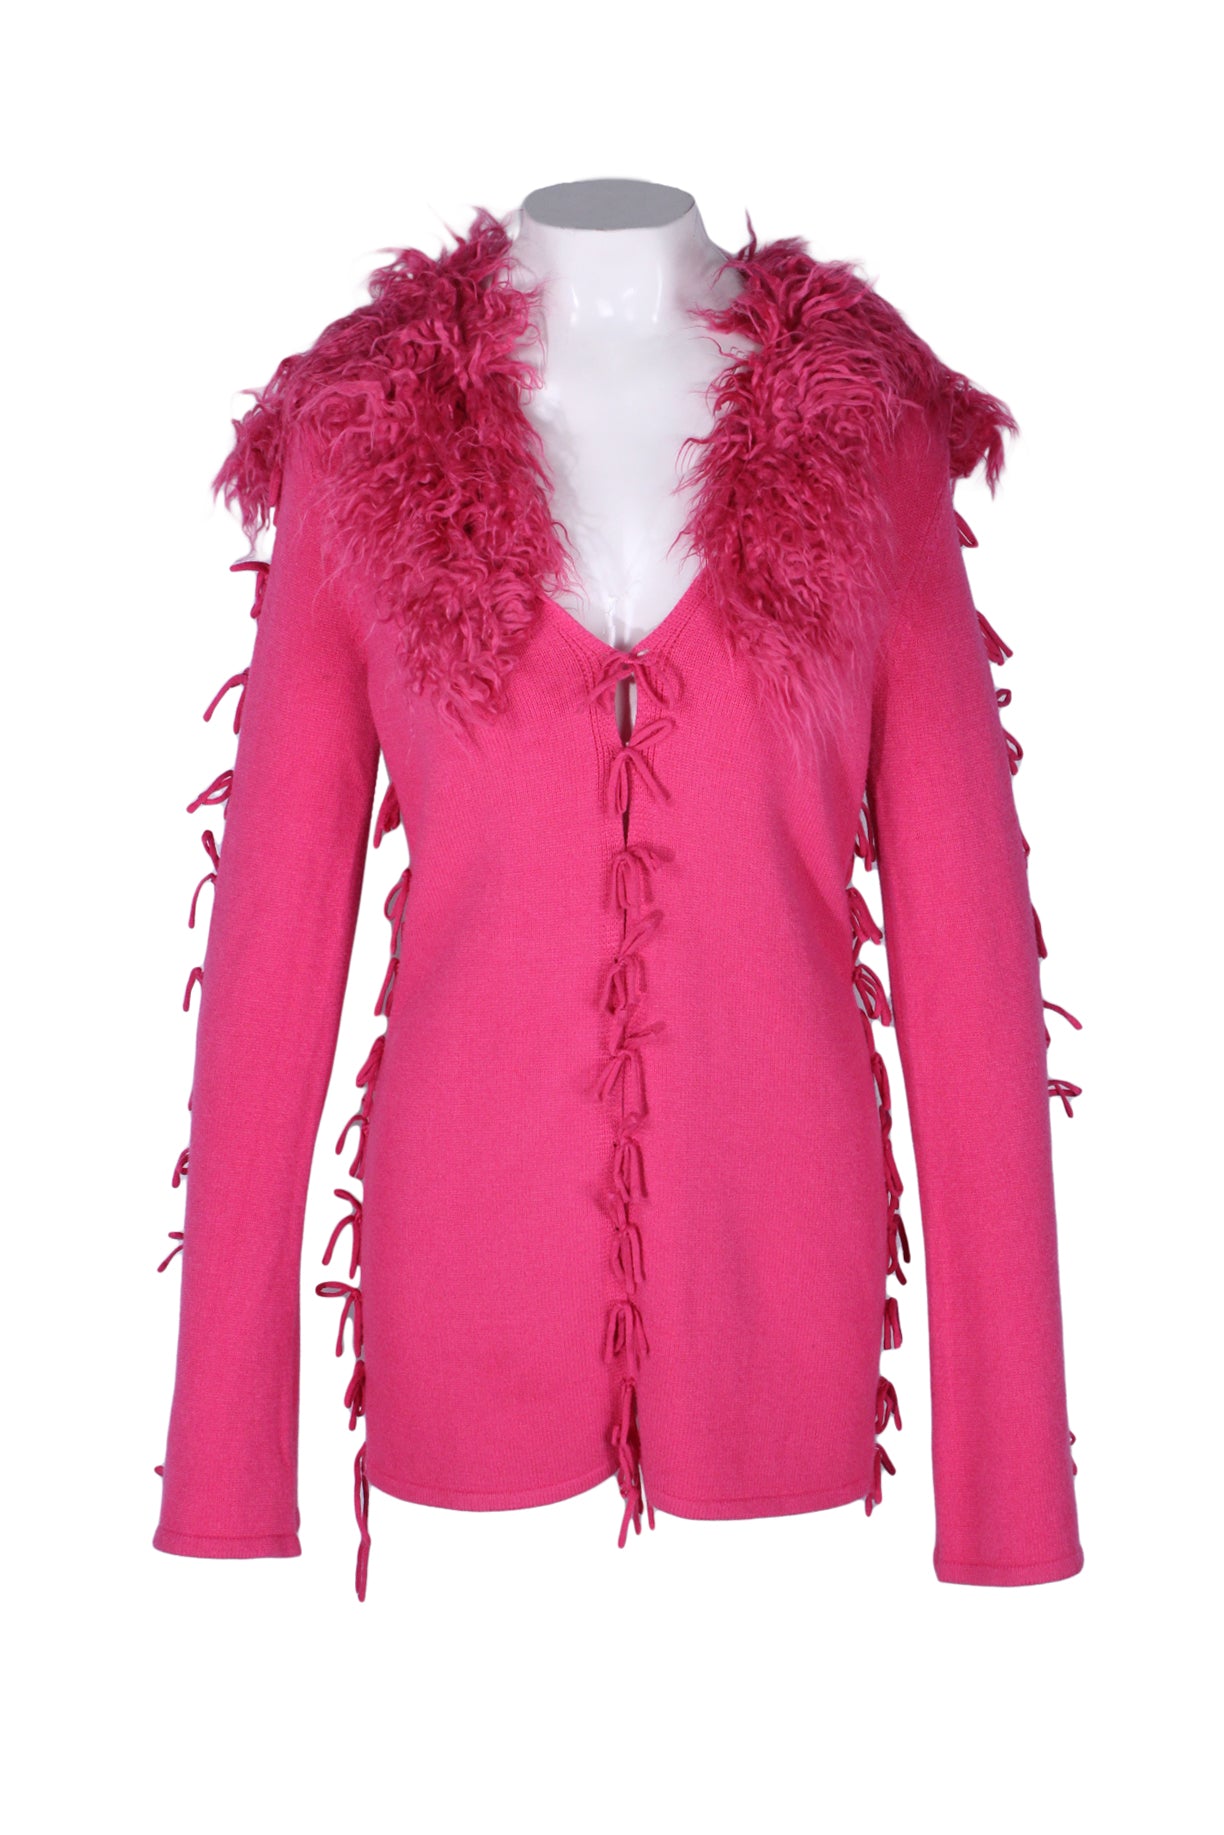 description: house of sunny pink peggy long sleeve fringe sweater. features form fitting cardigan, hits below hips, removable vegan fur collar, flared sleeves, tie-up closures at the front, sides and sleeves. 